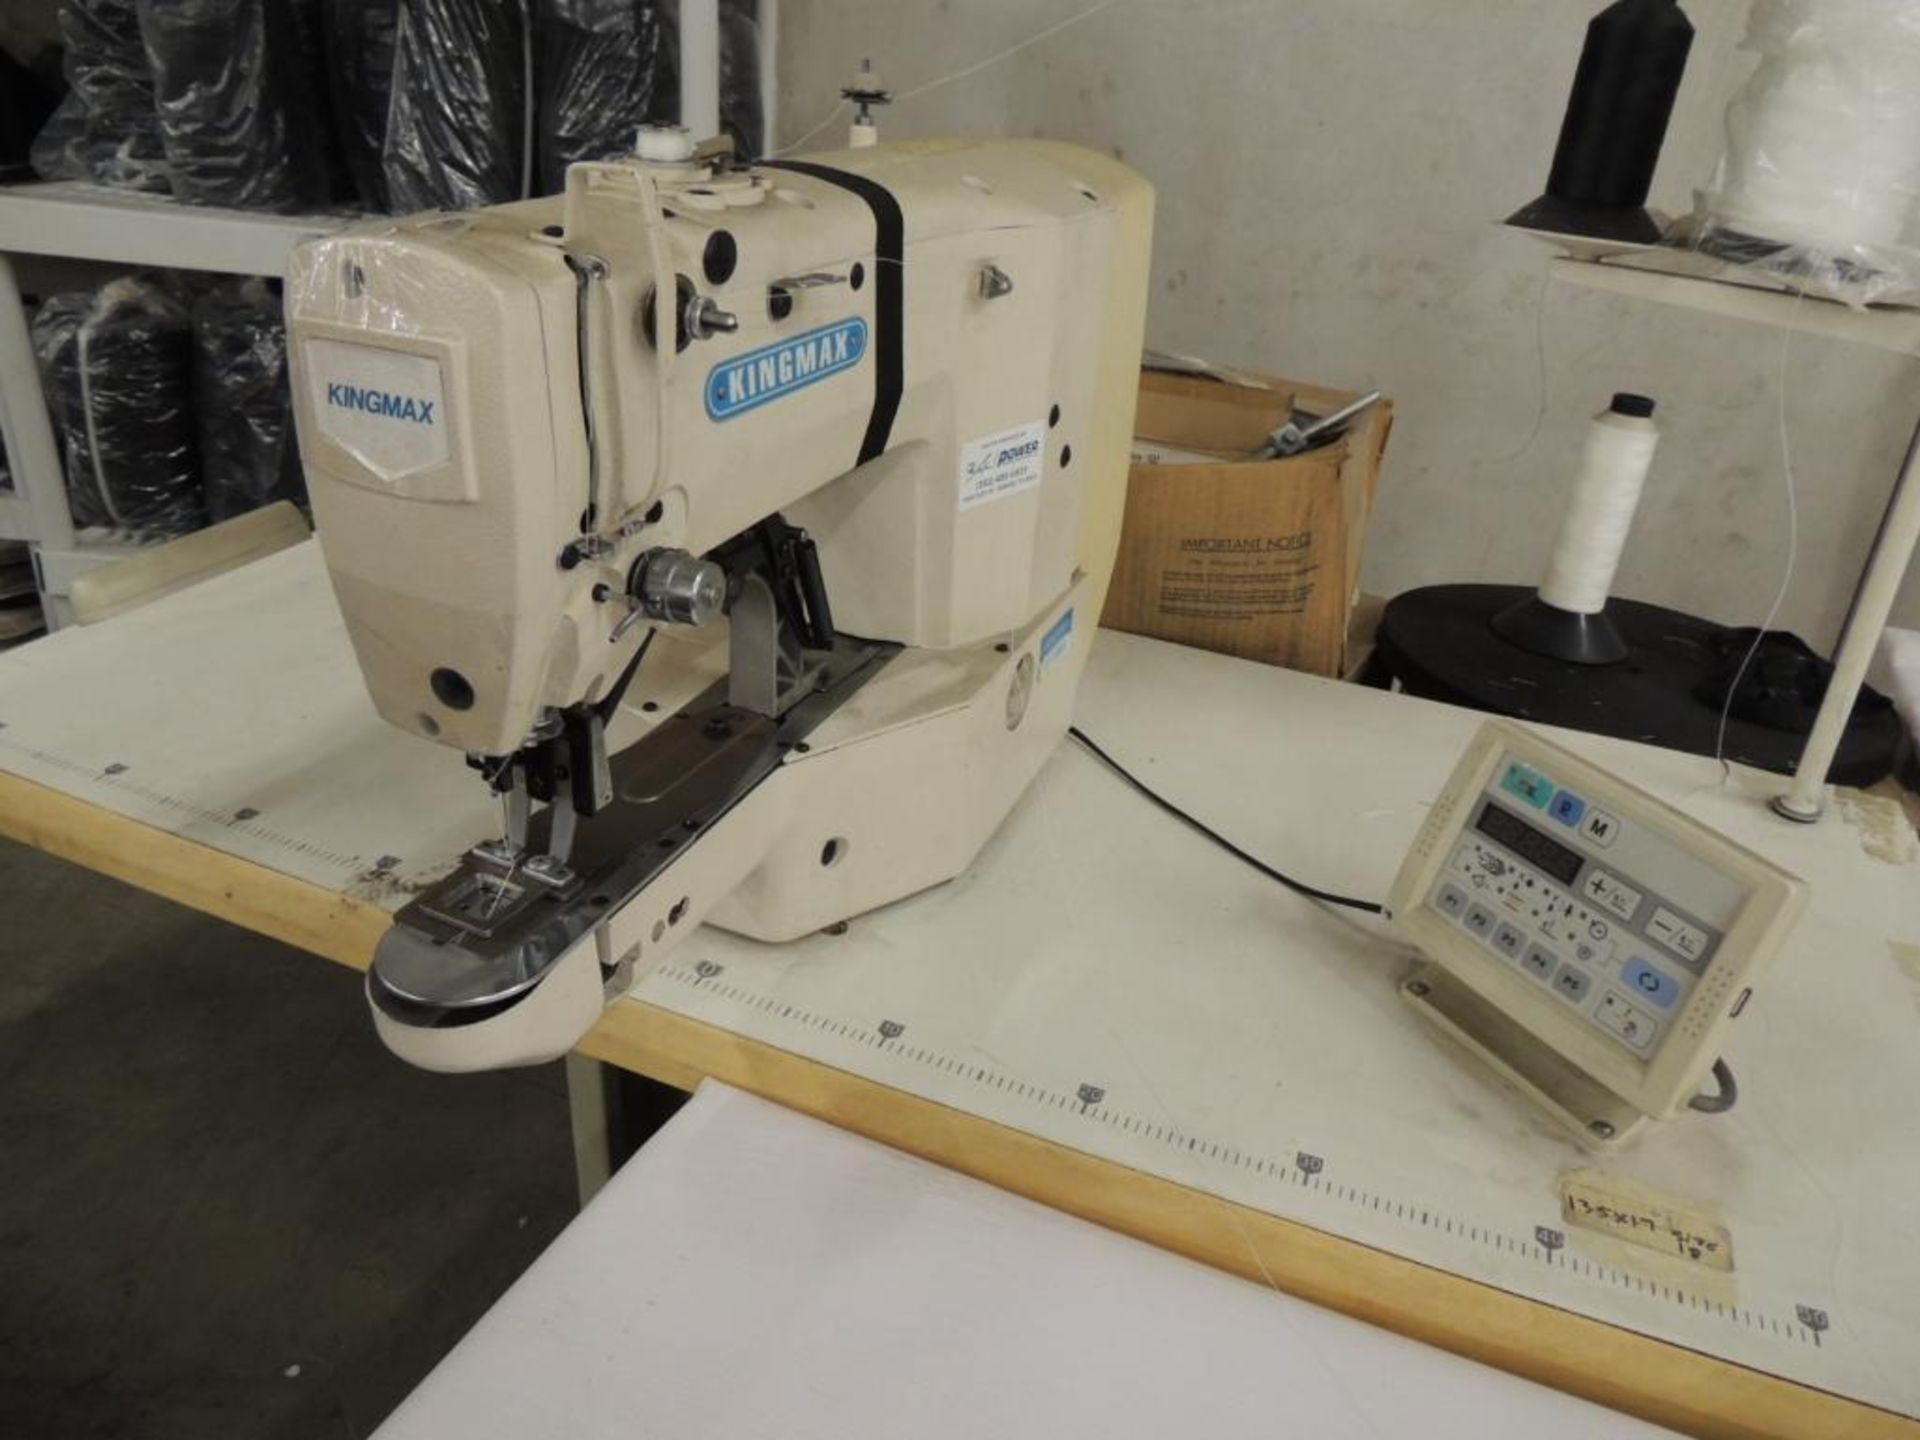 King Max GT1900A Sewing Machine with Digital Controller, on Table